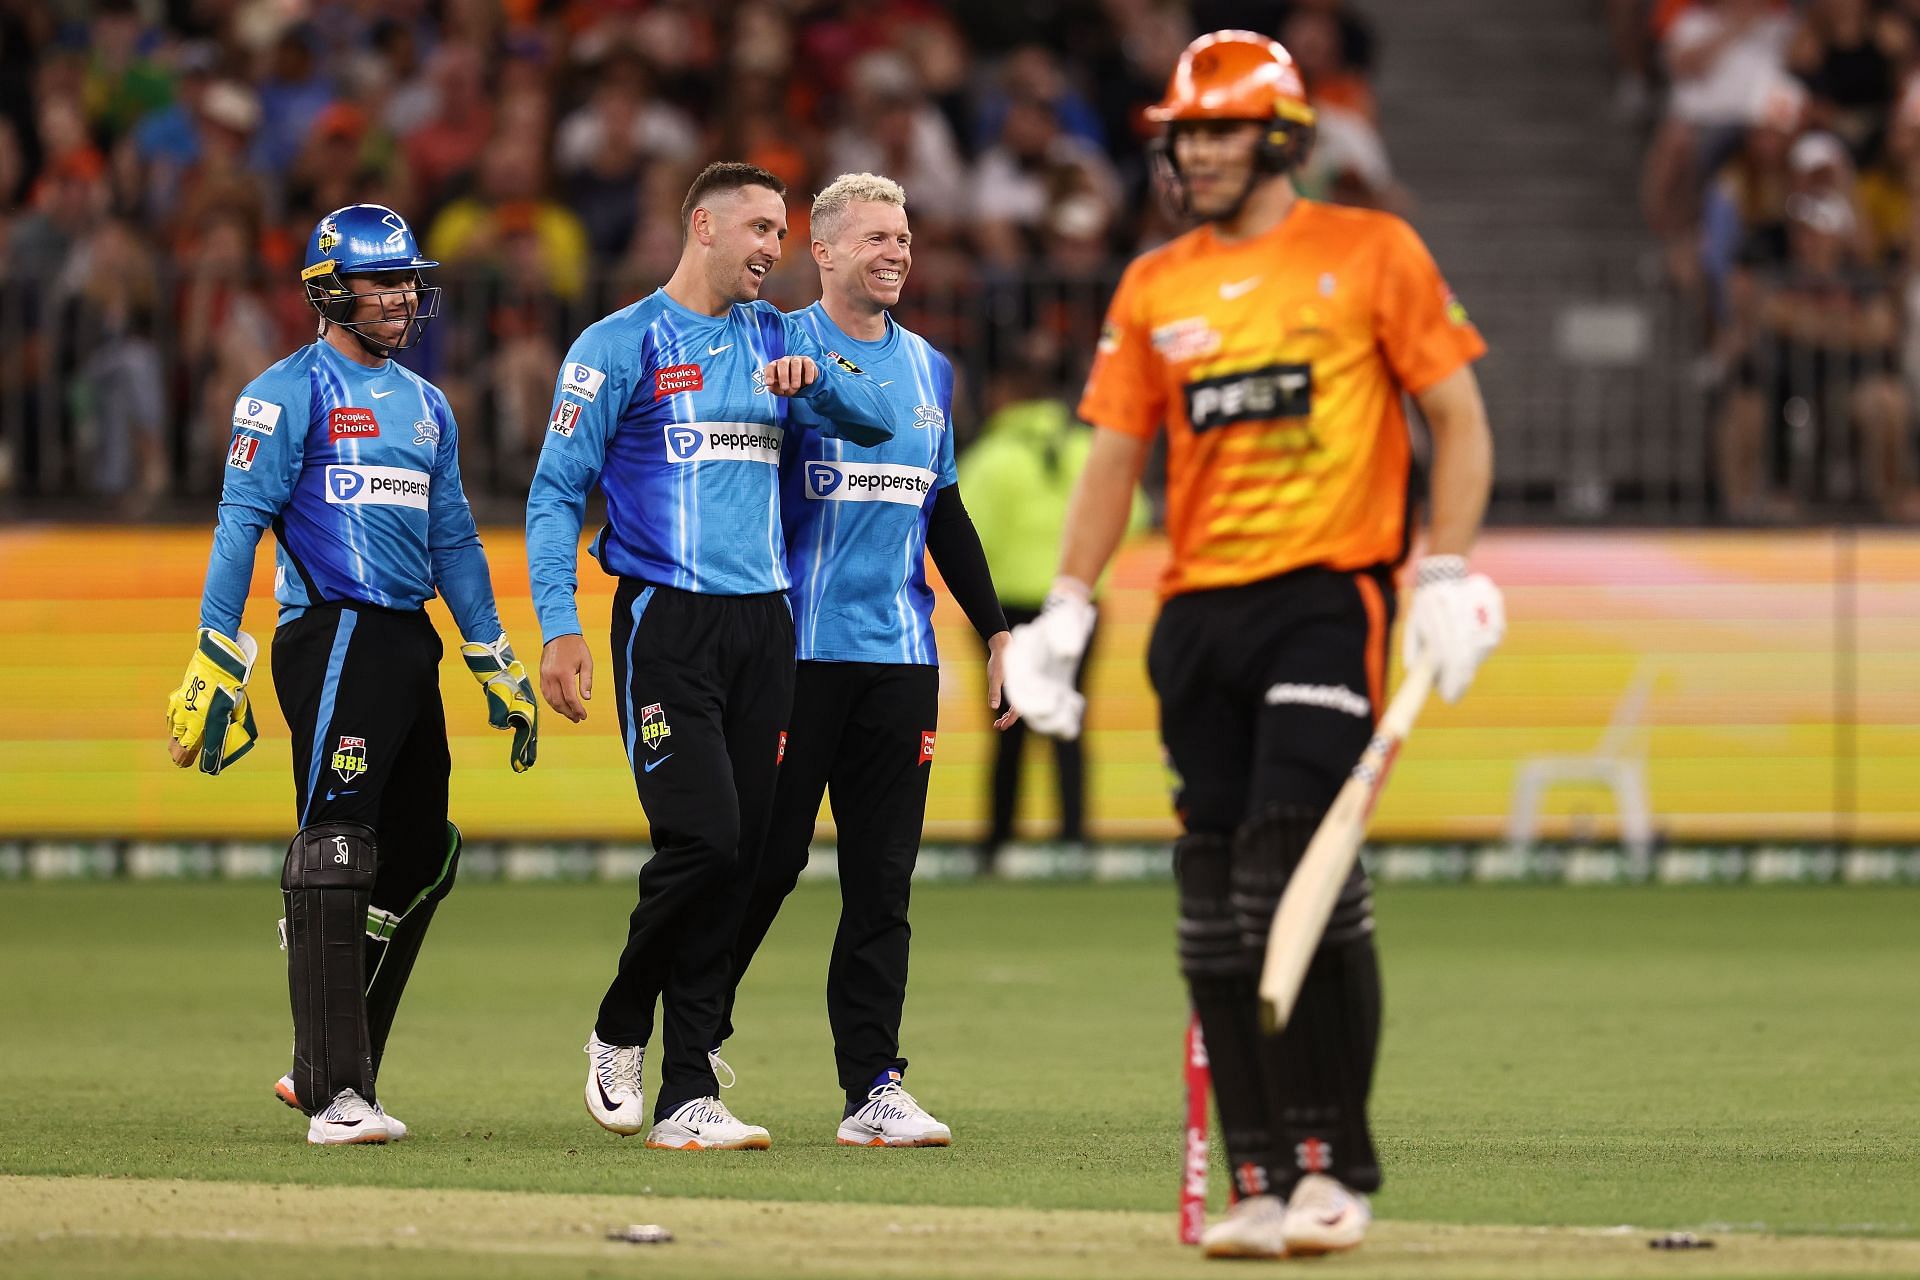 Matthew Short is the first ever X-Factor Substitute in Big Bash League